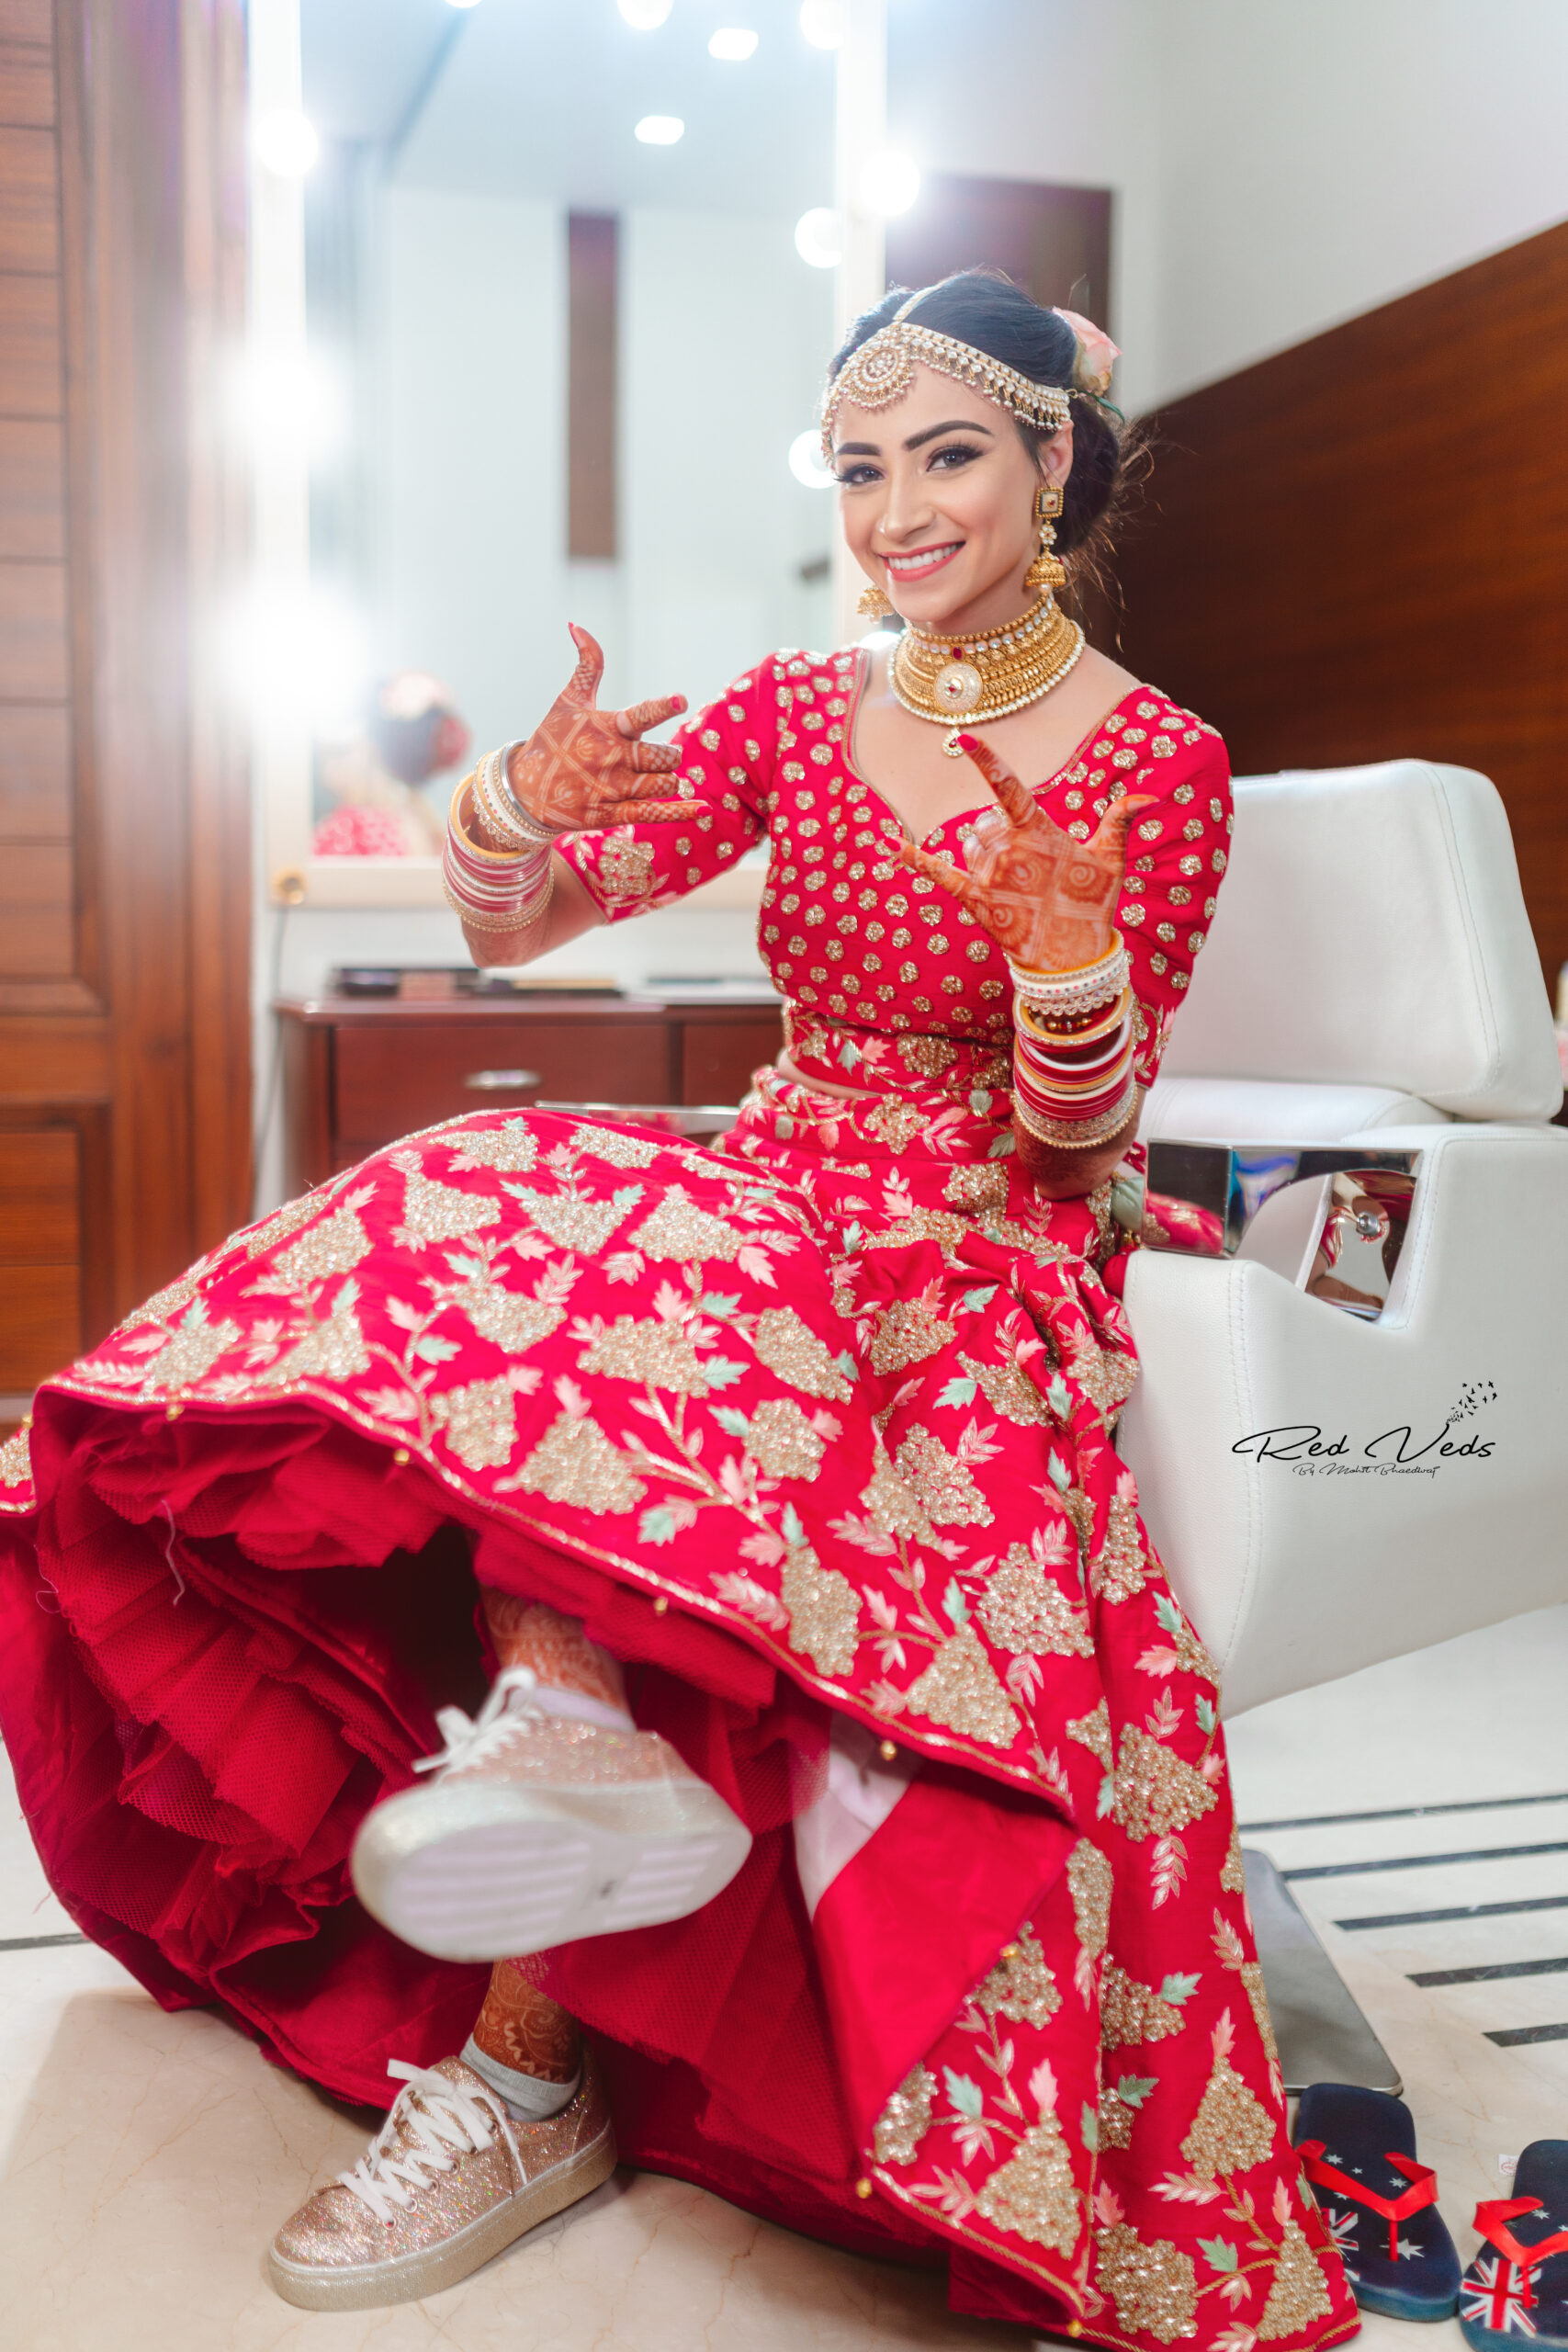 Playful & Different Couple Poses are a Must Have for the Wedding Day! |  Indian wedding poses, Wedding photography poses, Wedding couple poses